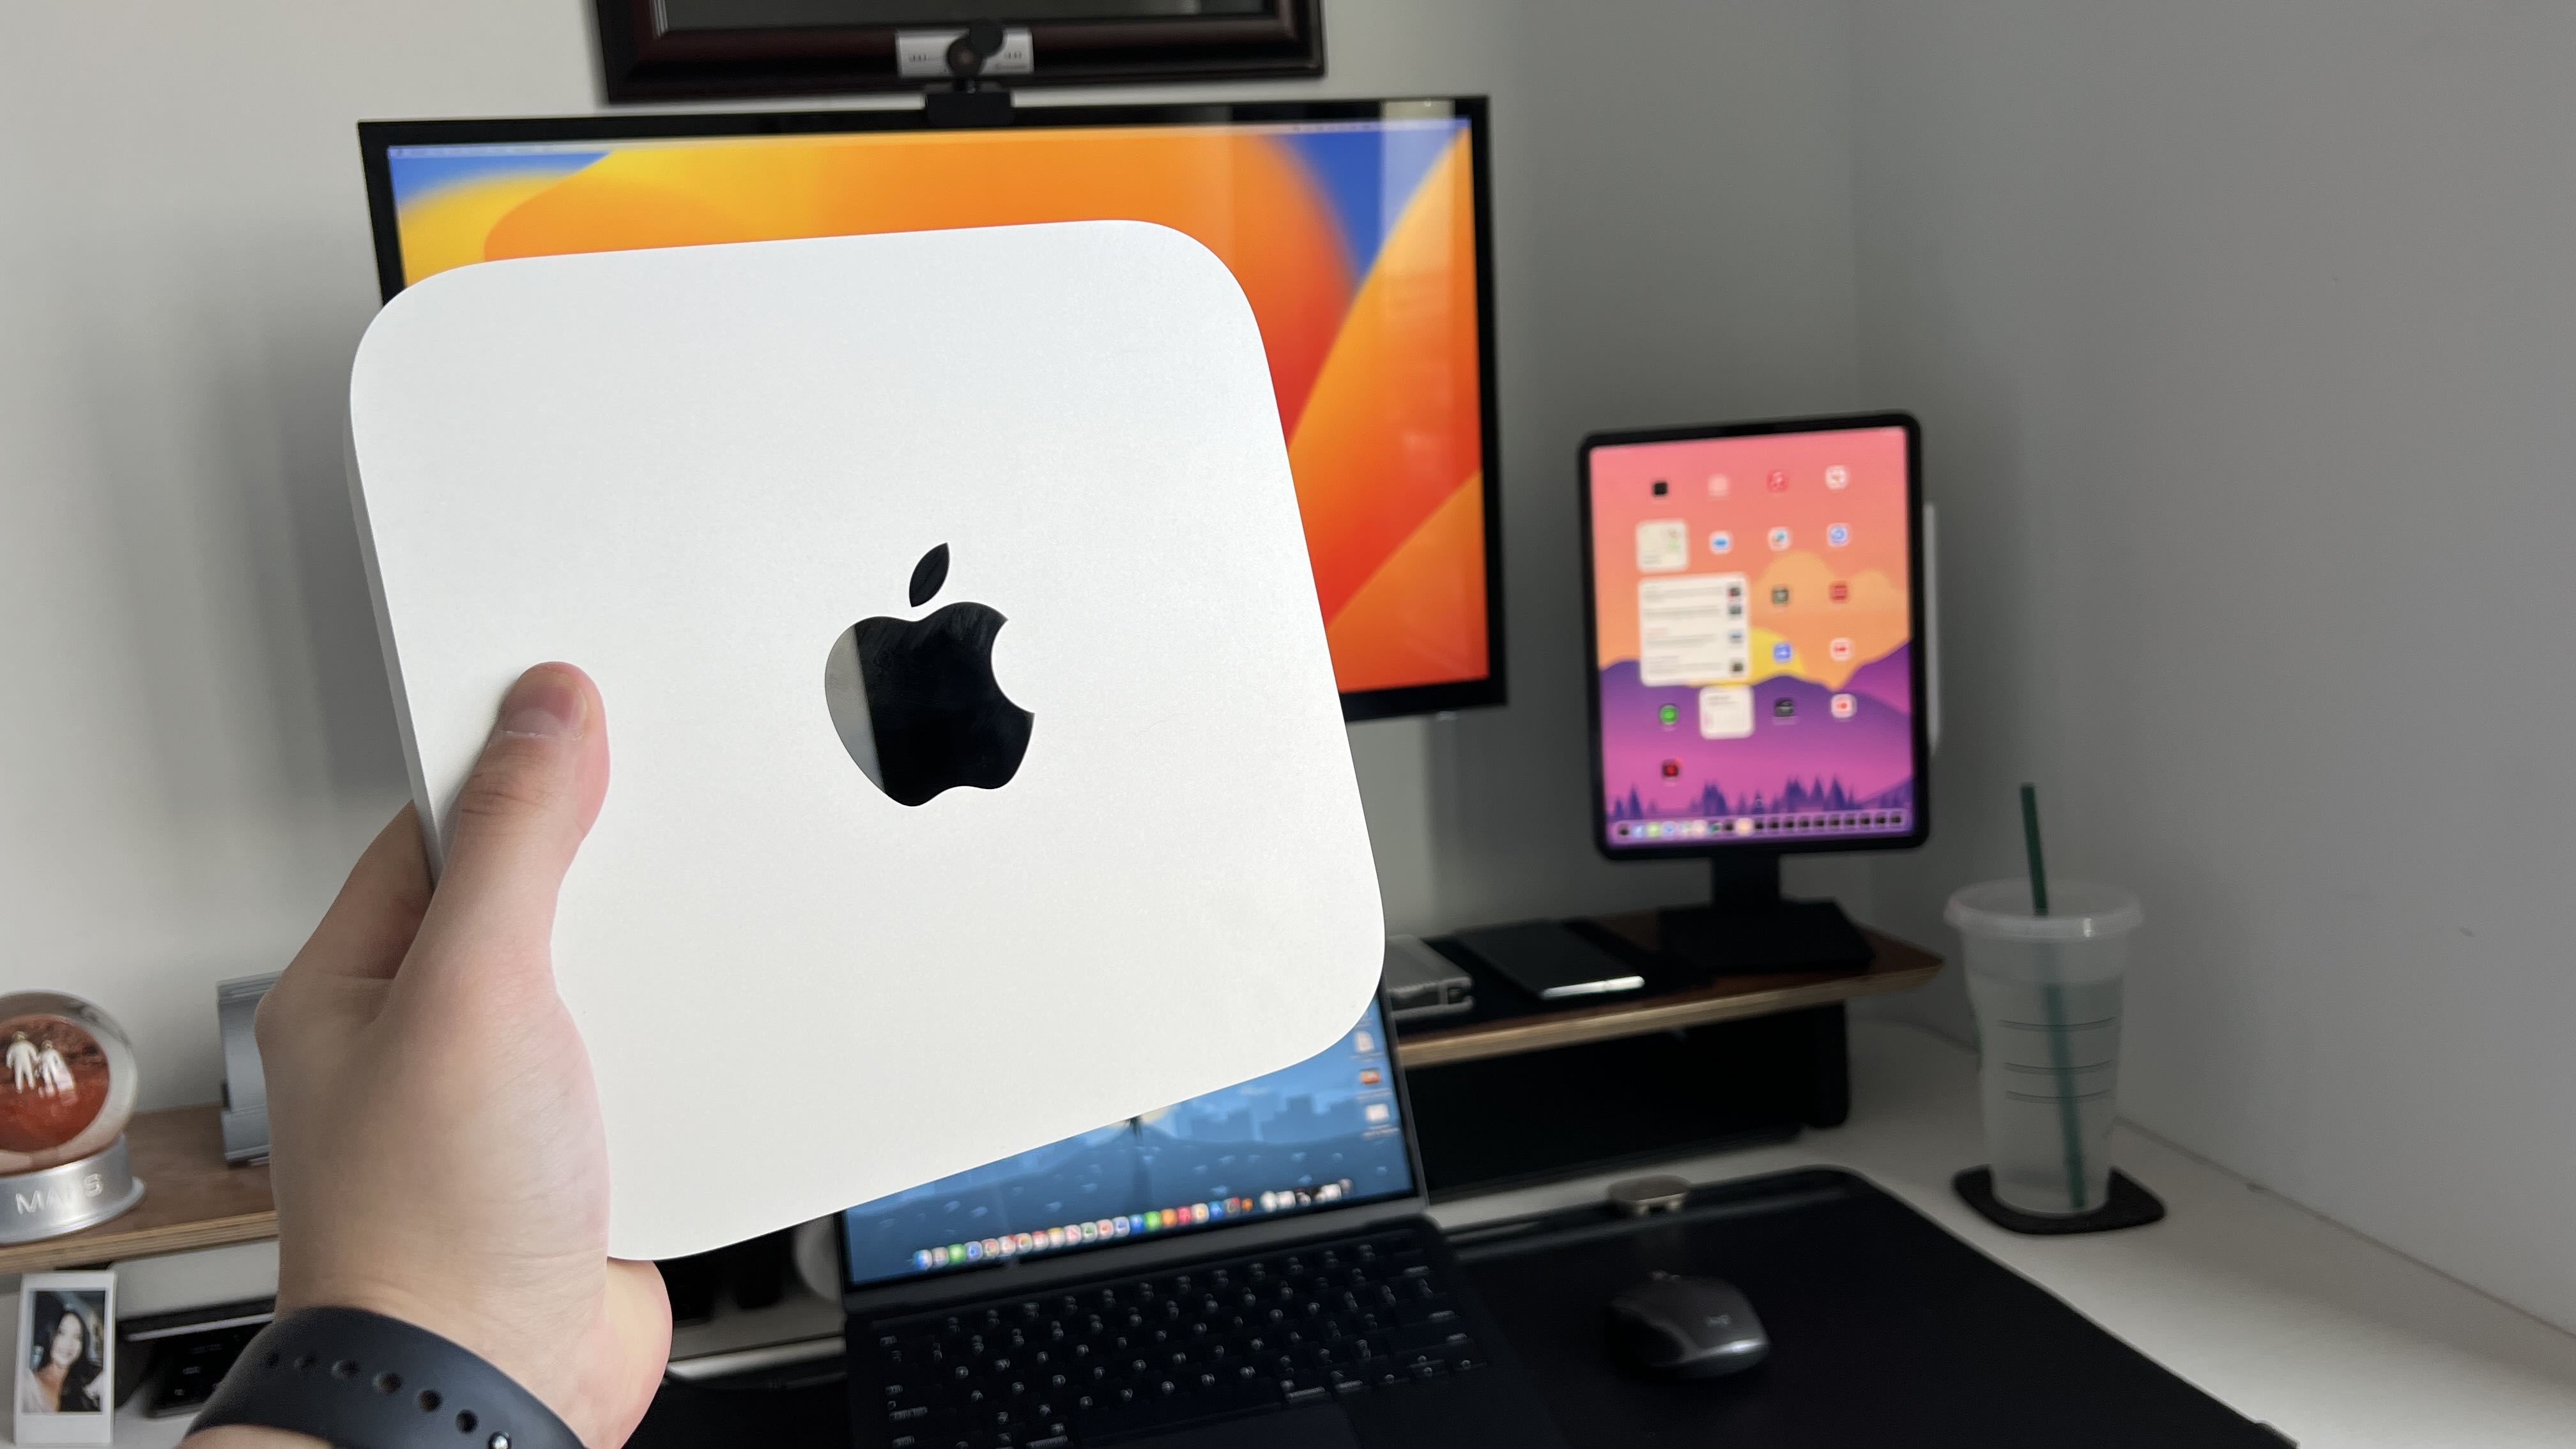 Dual Mac minis and Xbox play in gamer's workstation [Setups]